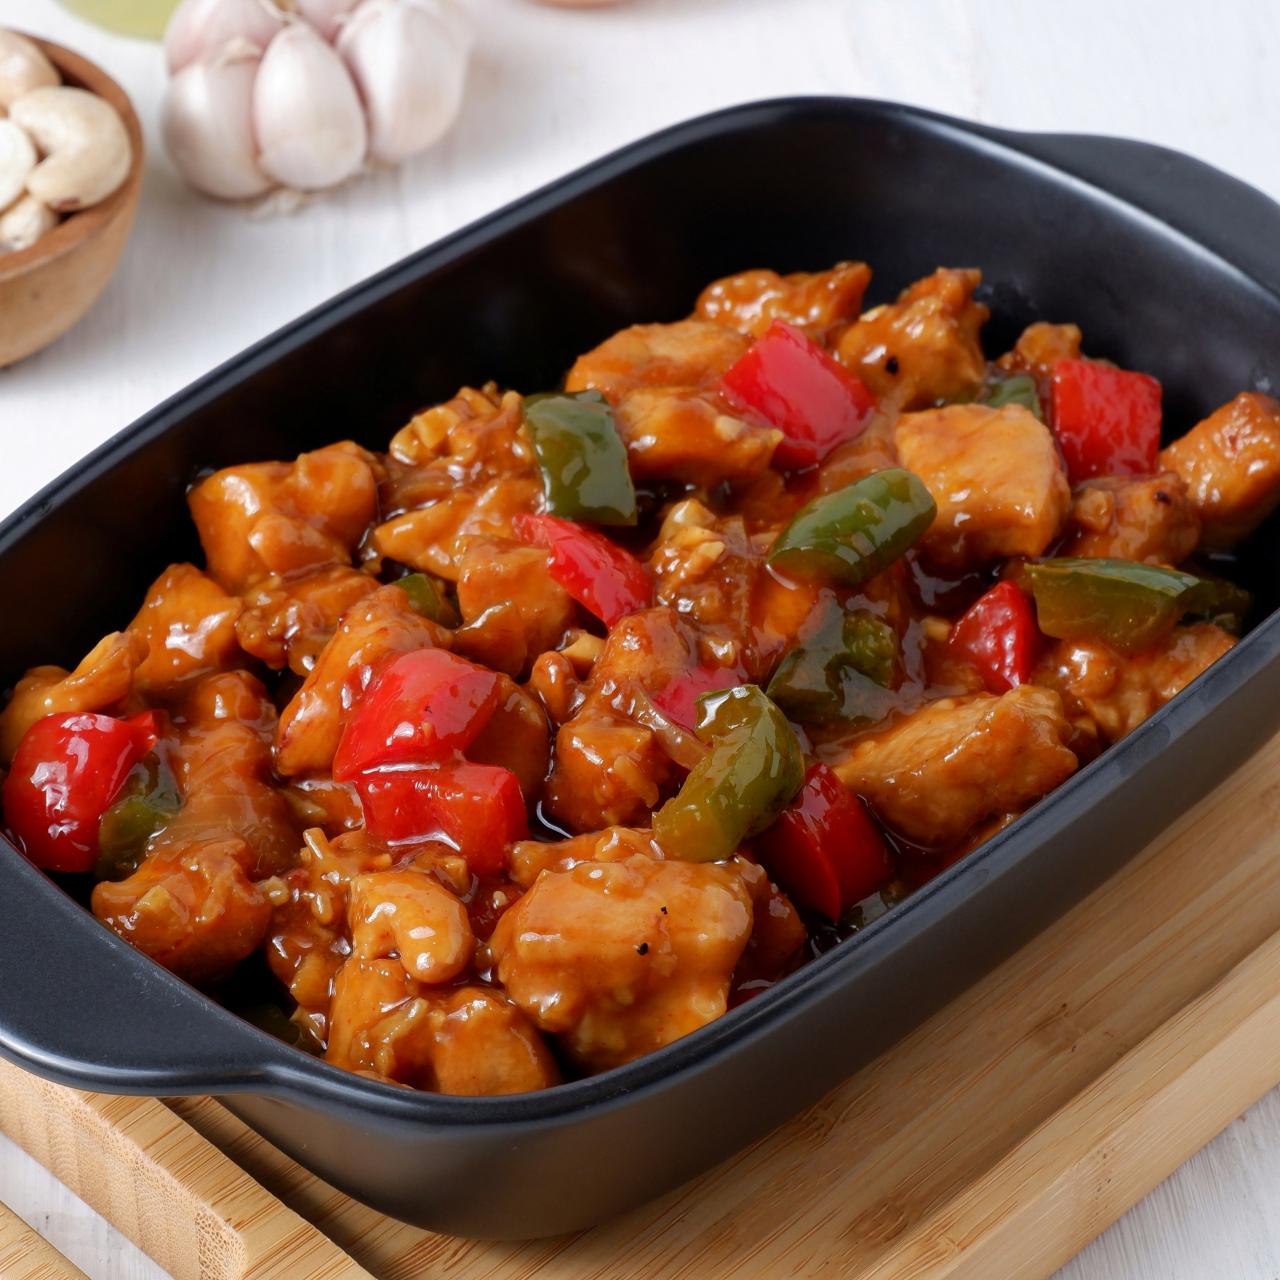 https://food.fnr.sndimg.com/content/dam/images/food/fullset/2021/07/12/kung-pao-chicken-in-reusable-takeout-container.jpg.rend.hgtvcom.1280.1280.suffix/1626142438095.jpeg